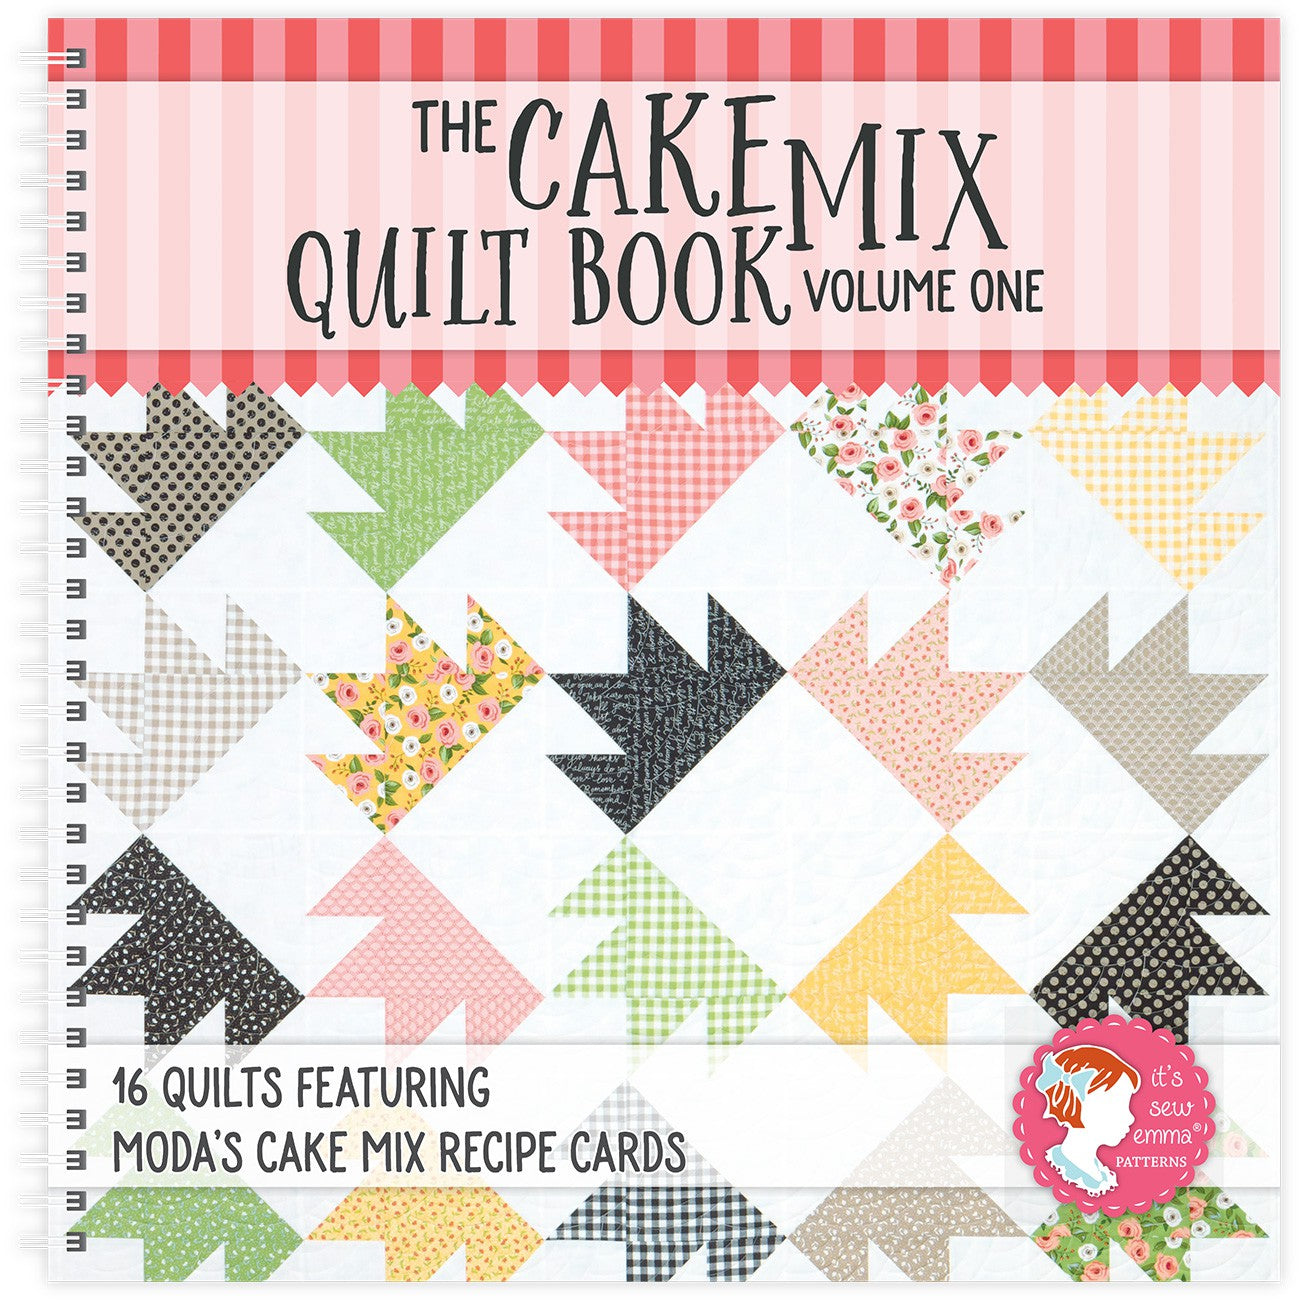 The Cake Mix Quilt Book Volume One by Kimberly Jolly for It's Sew Emma